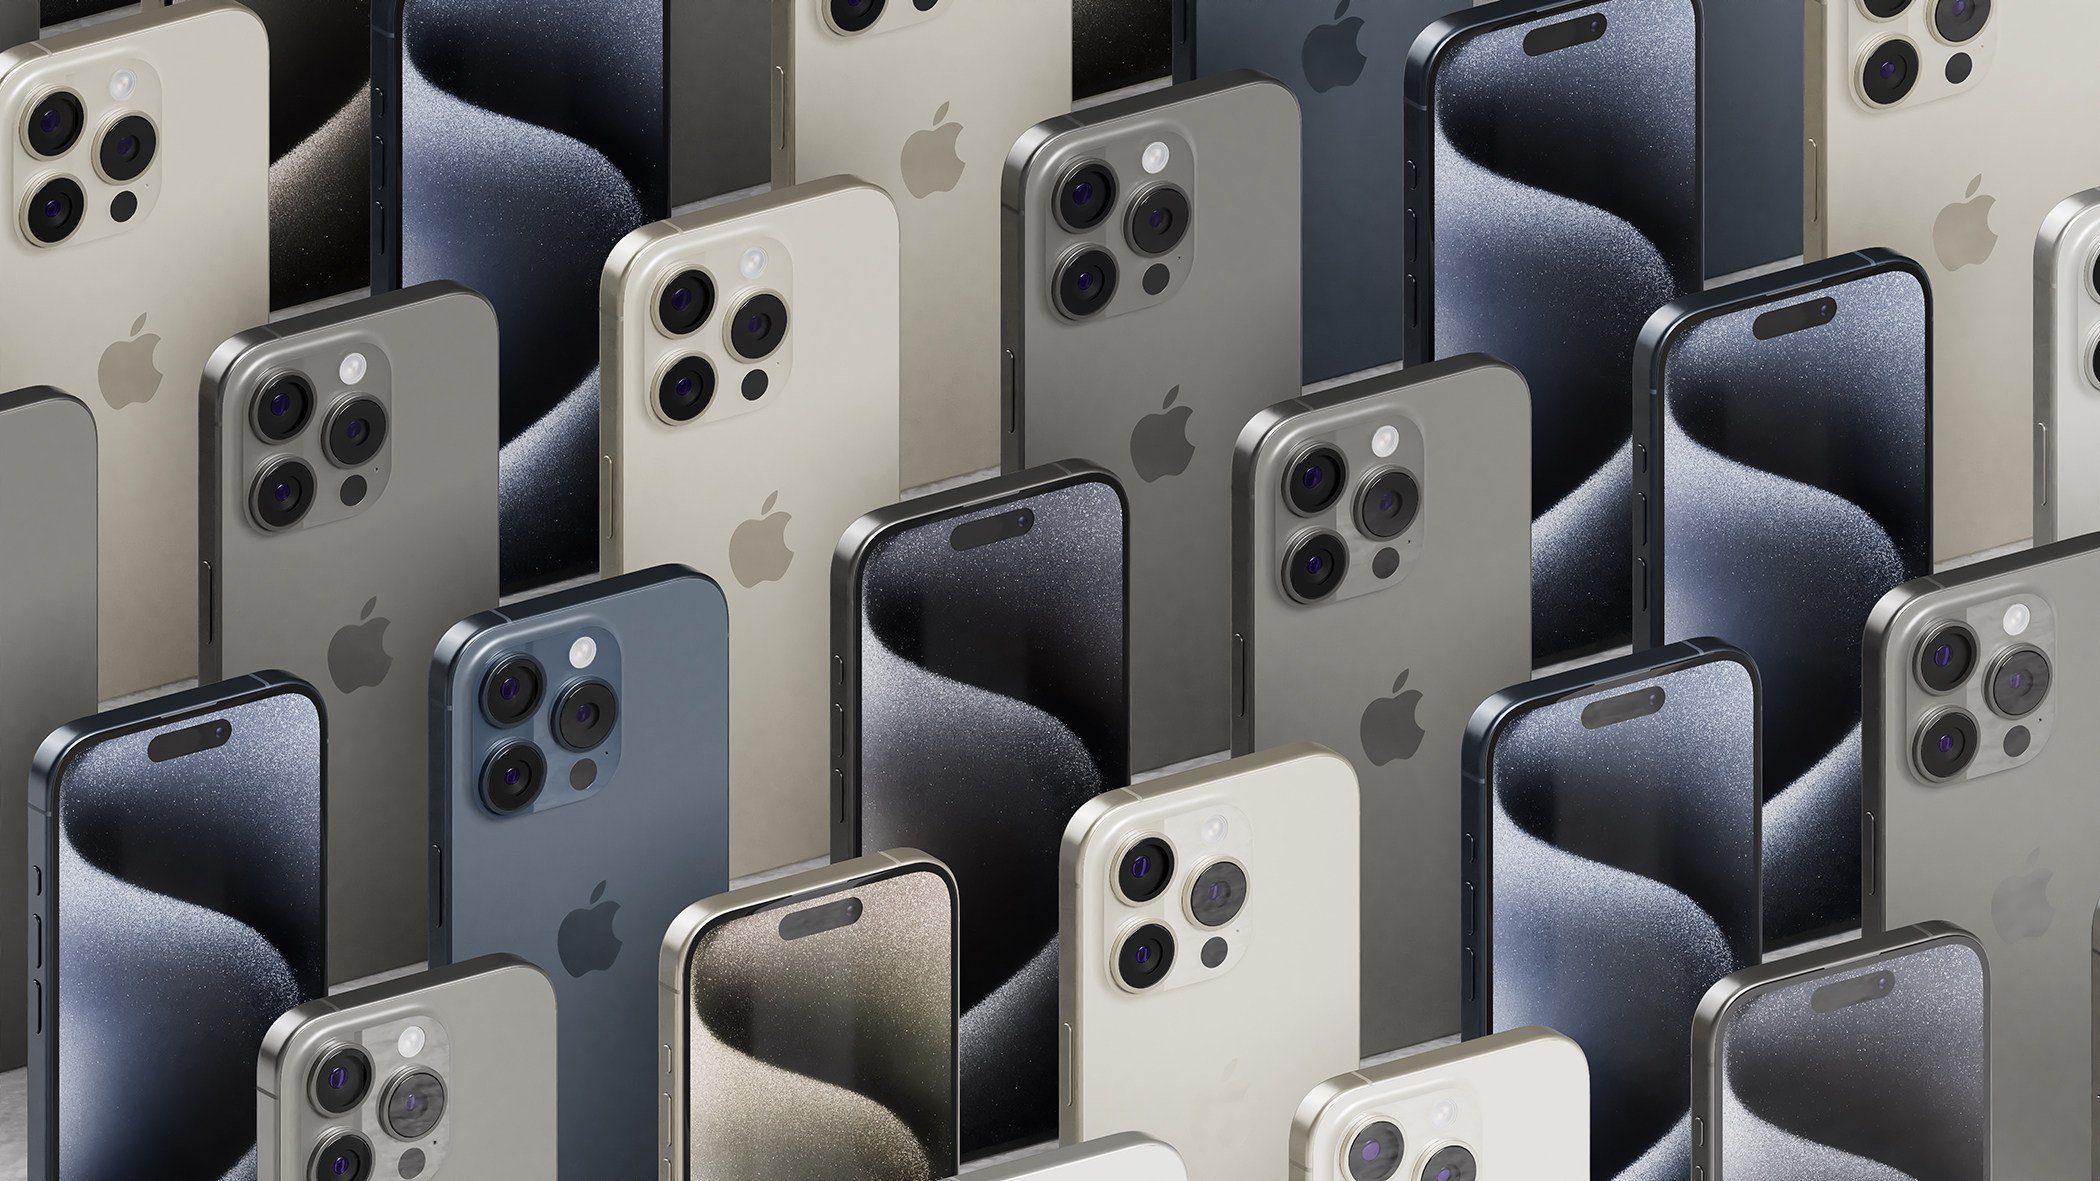 Apple’s suppliers, including primary iPhone assembler Foxconn Technology Group, are boosting production in countries like Vietnam and India. Photo: Shutterstock